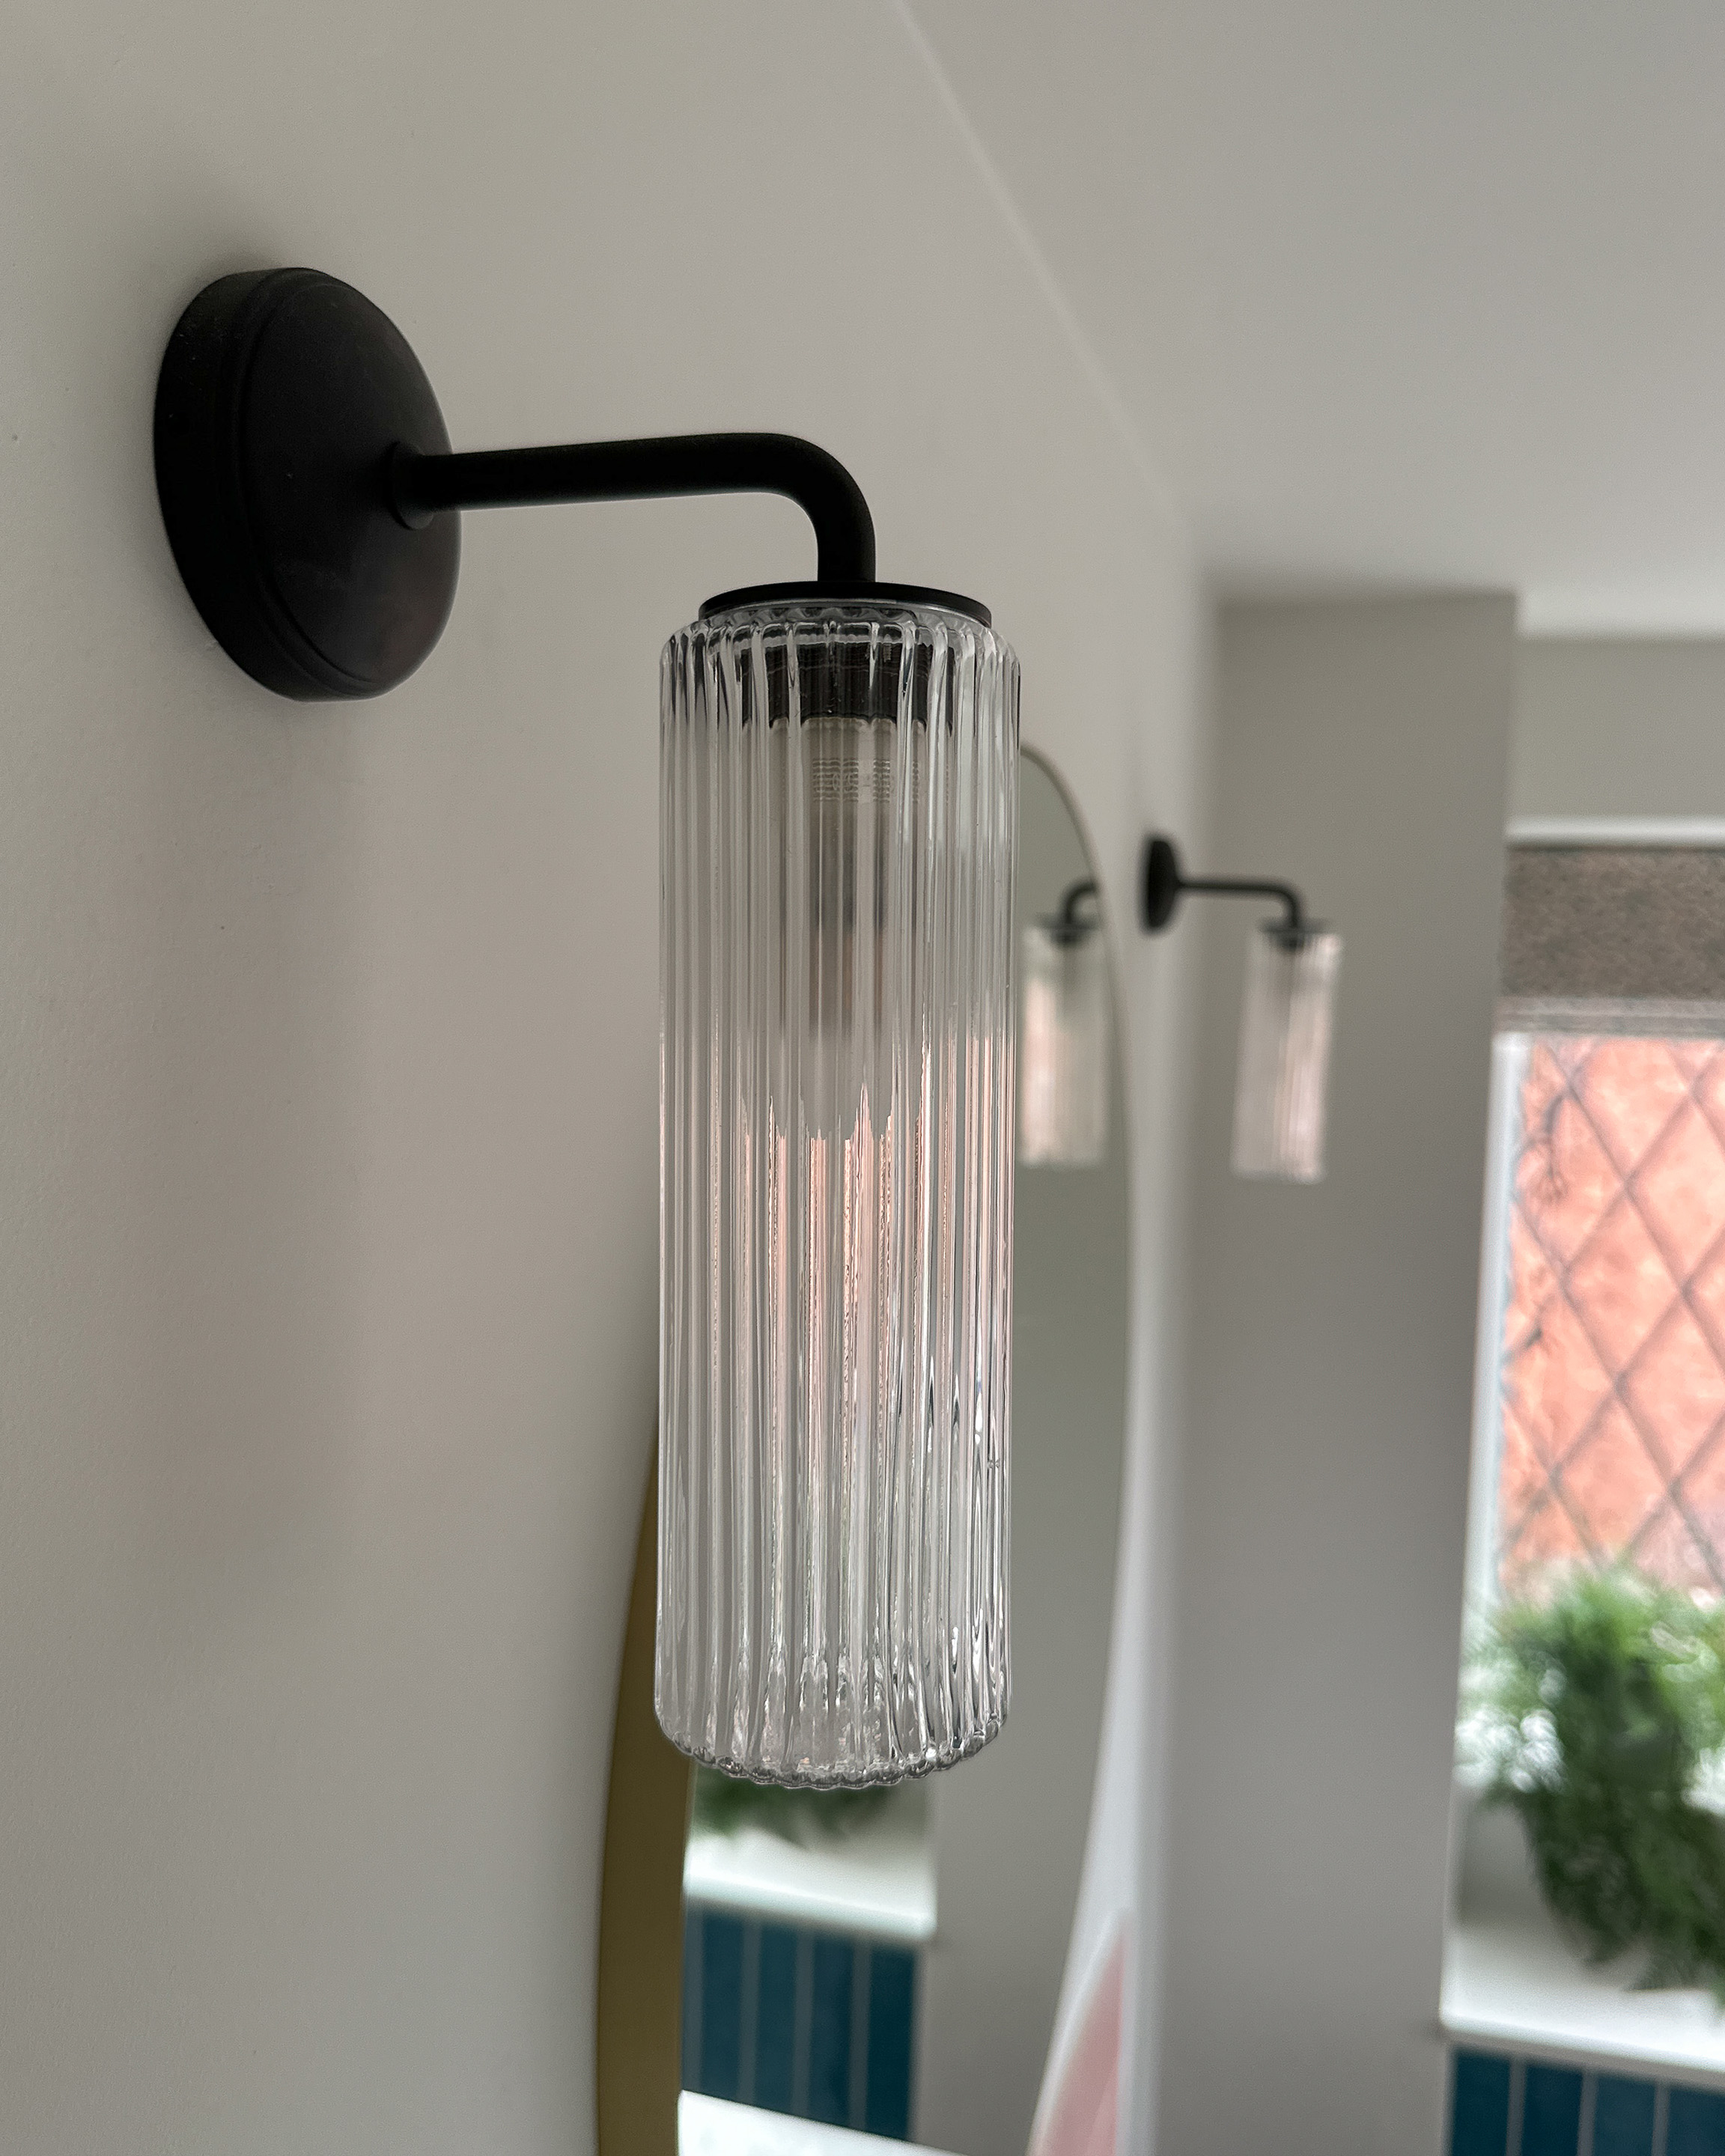 Bathroom wall lights in bronze with fluted glass from Corston Architectural are situated either side of the round mirror.